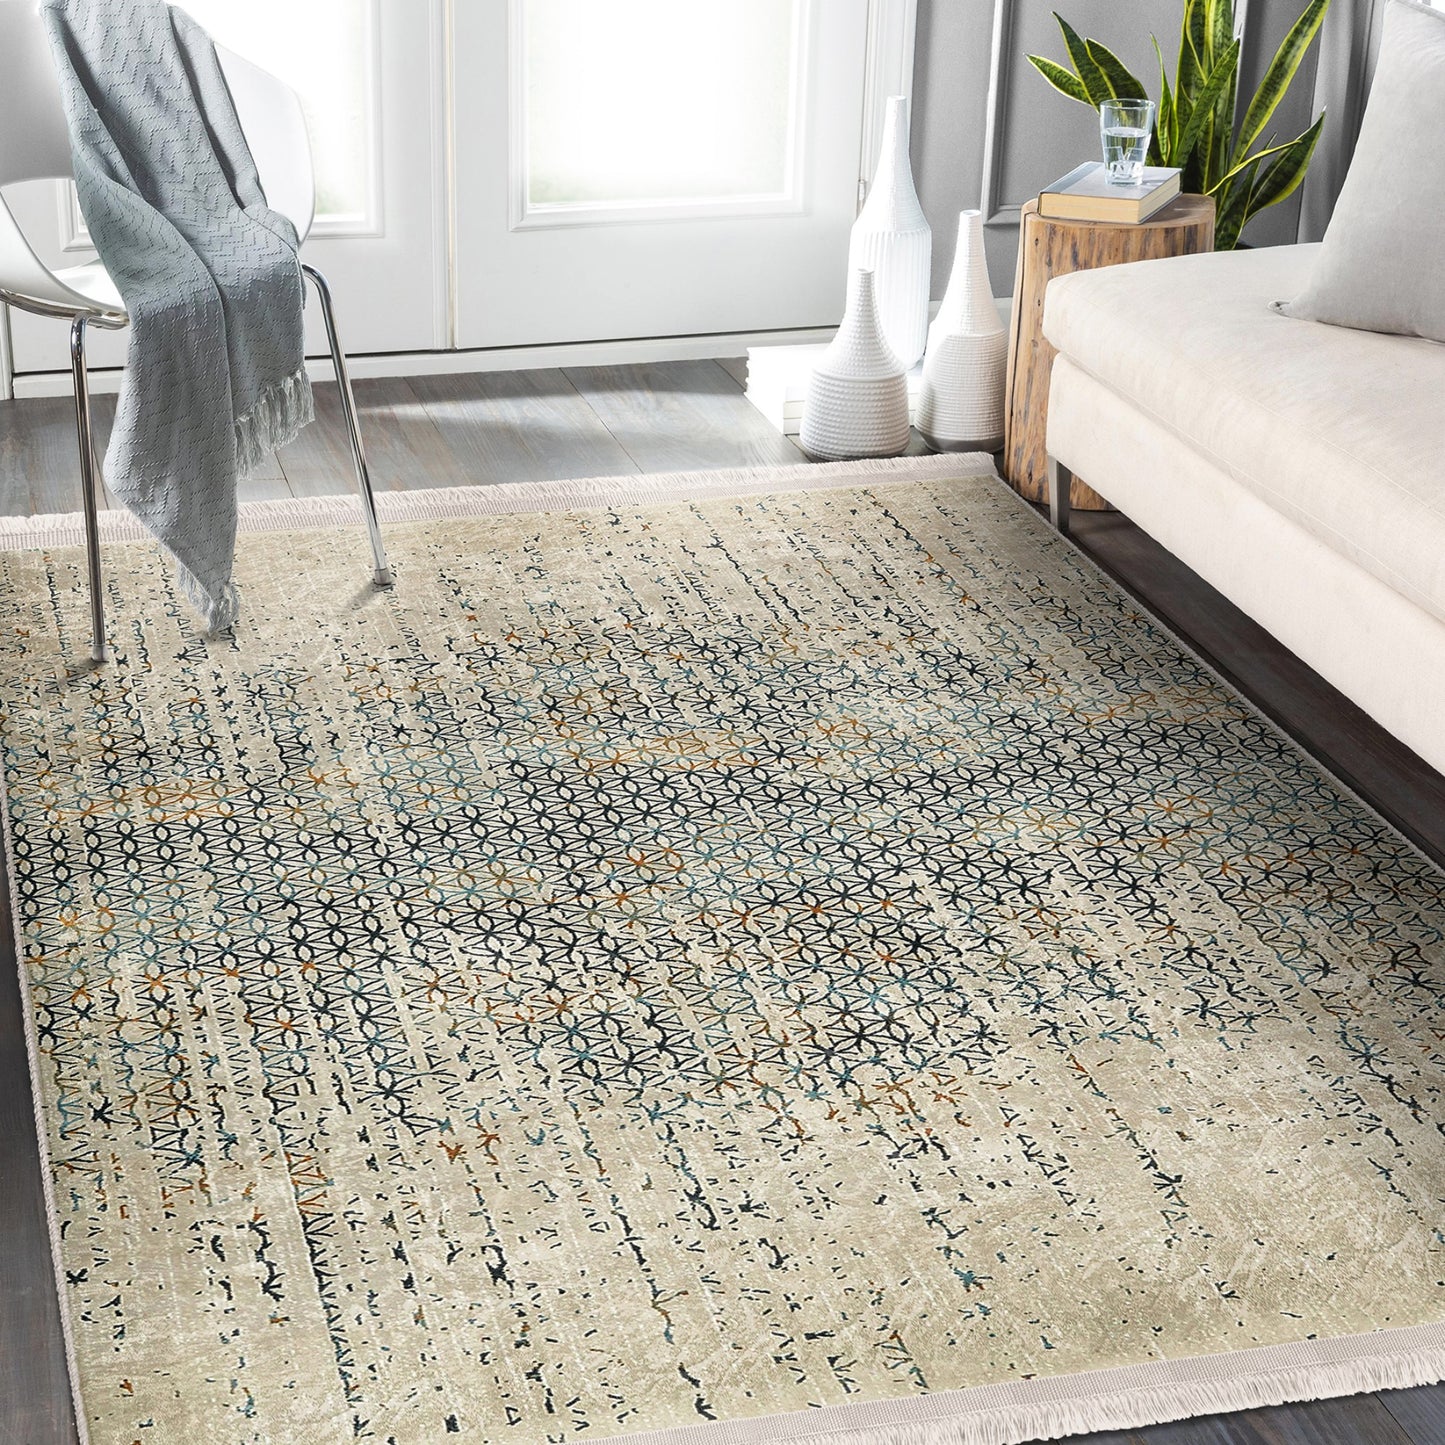 Functional and Stylish Area Rug with Textured Jute Craftsmanship